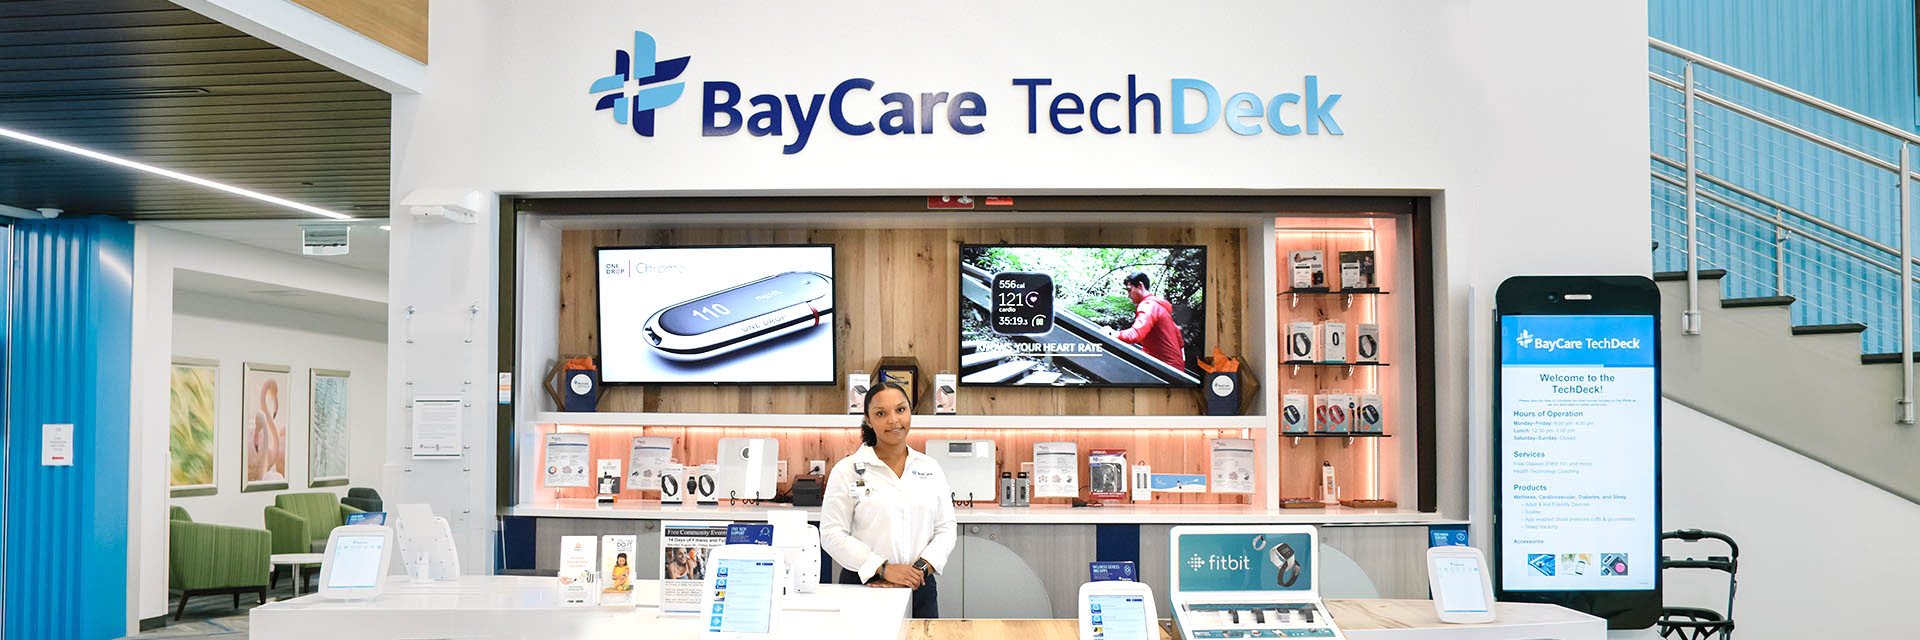 A BayCare employee standing in front of a BayCare TechDeck station.